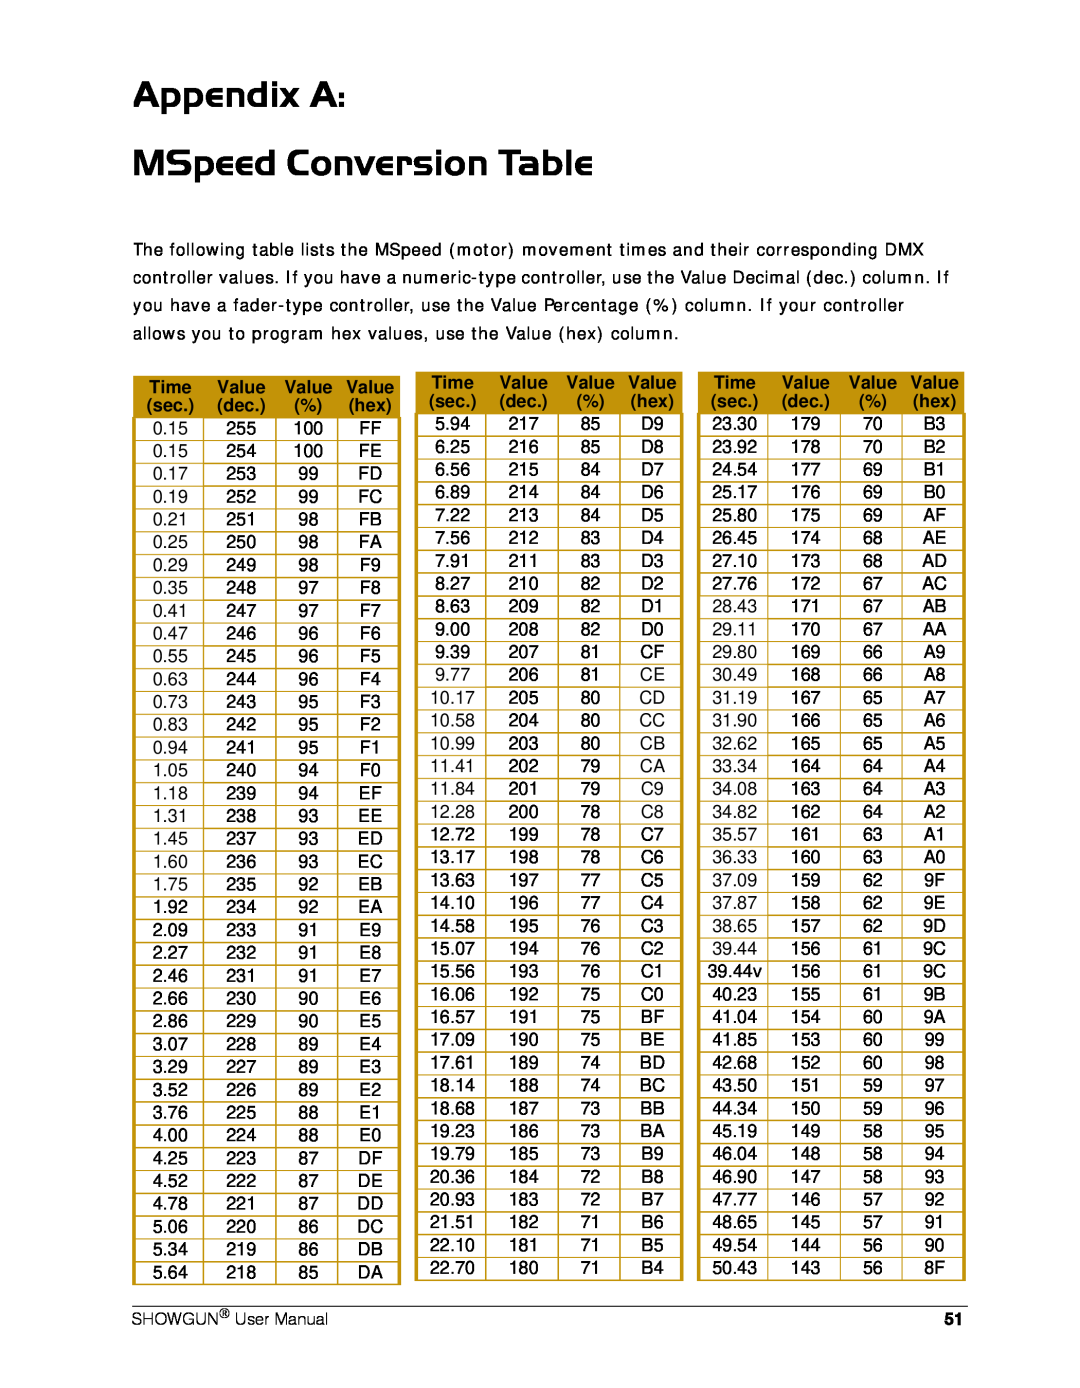 High End Systems SHOWGUN user manual Appendix A MSpeed Conversion Table, Time, Value 